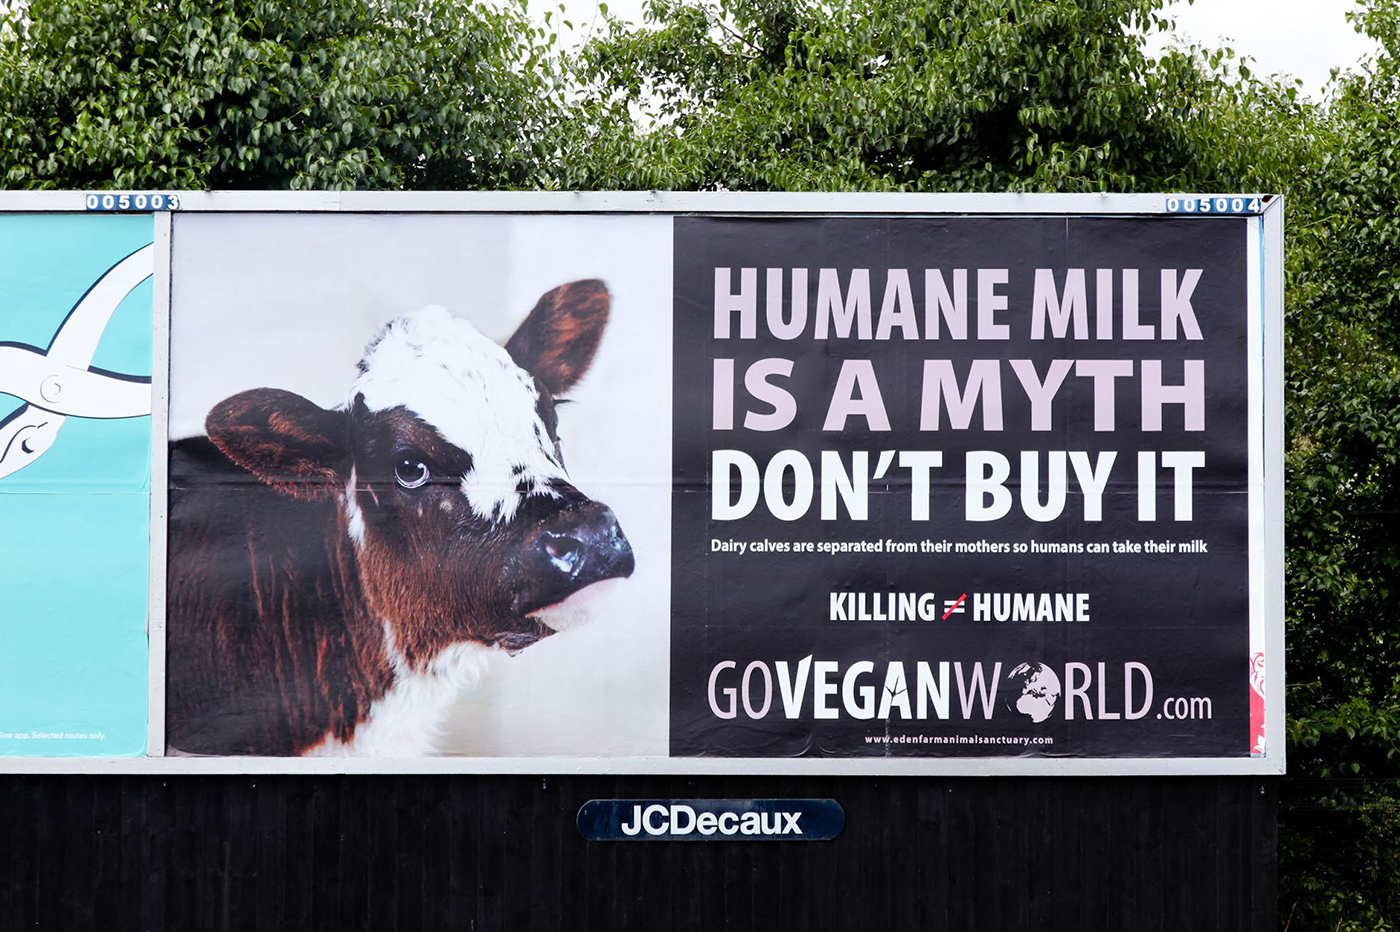 Go Vegan World Campaign in North East of England